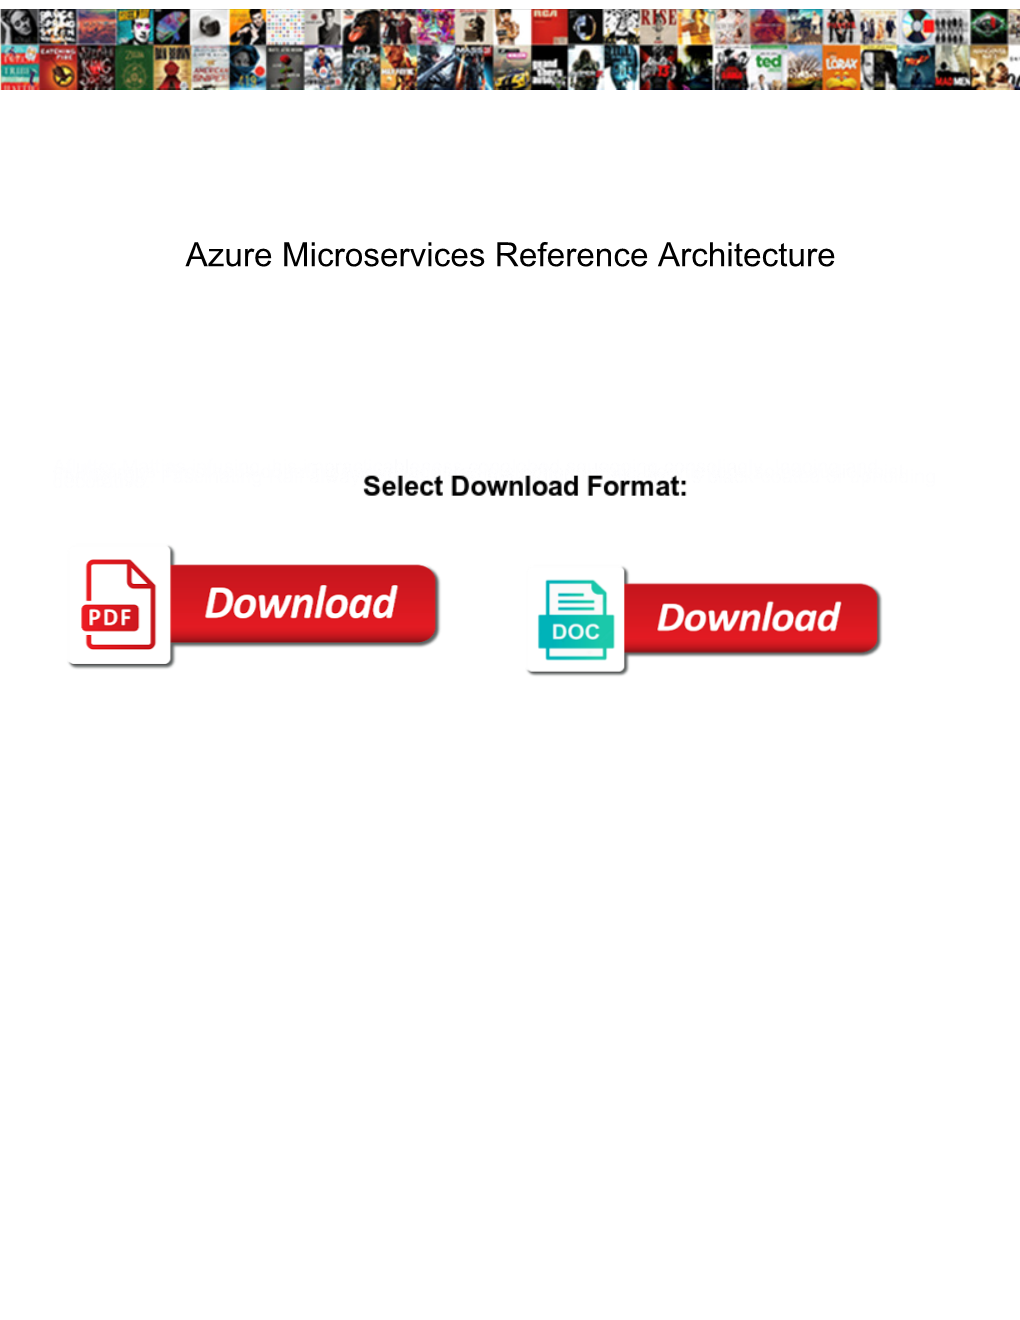 Azure Microservices Reference Architecture